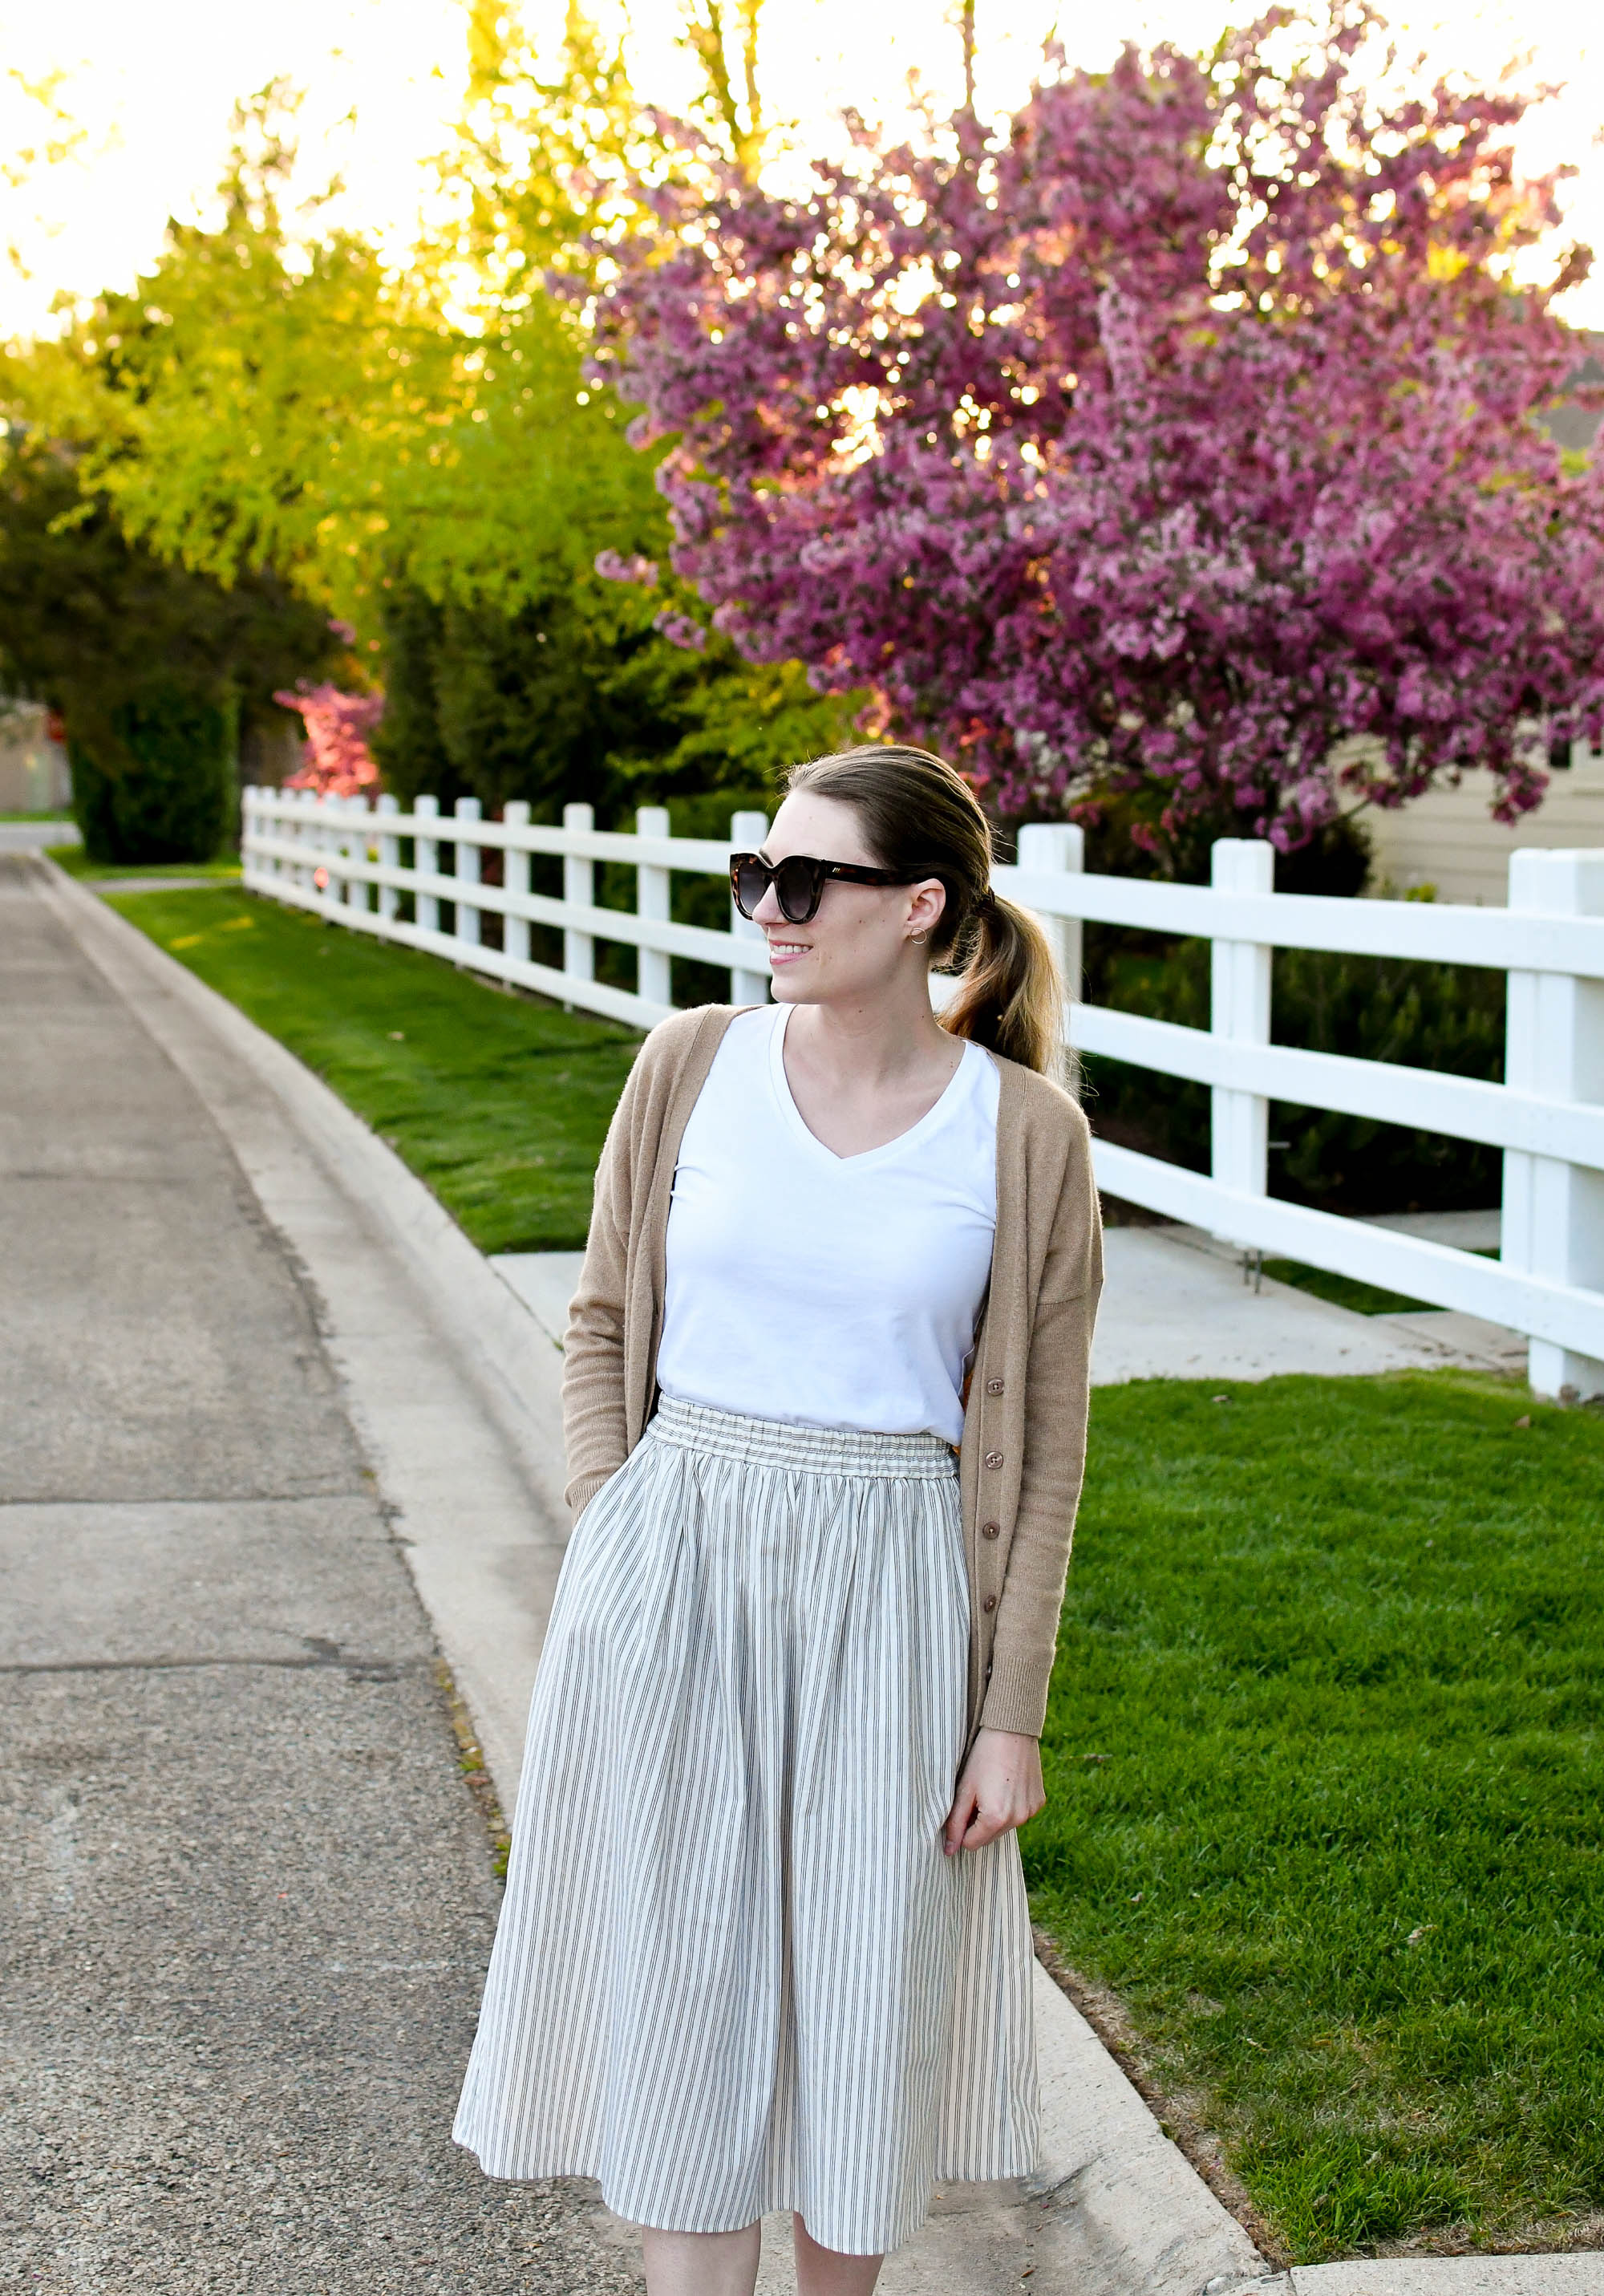 May is for midi skirts